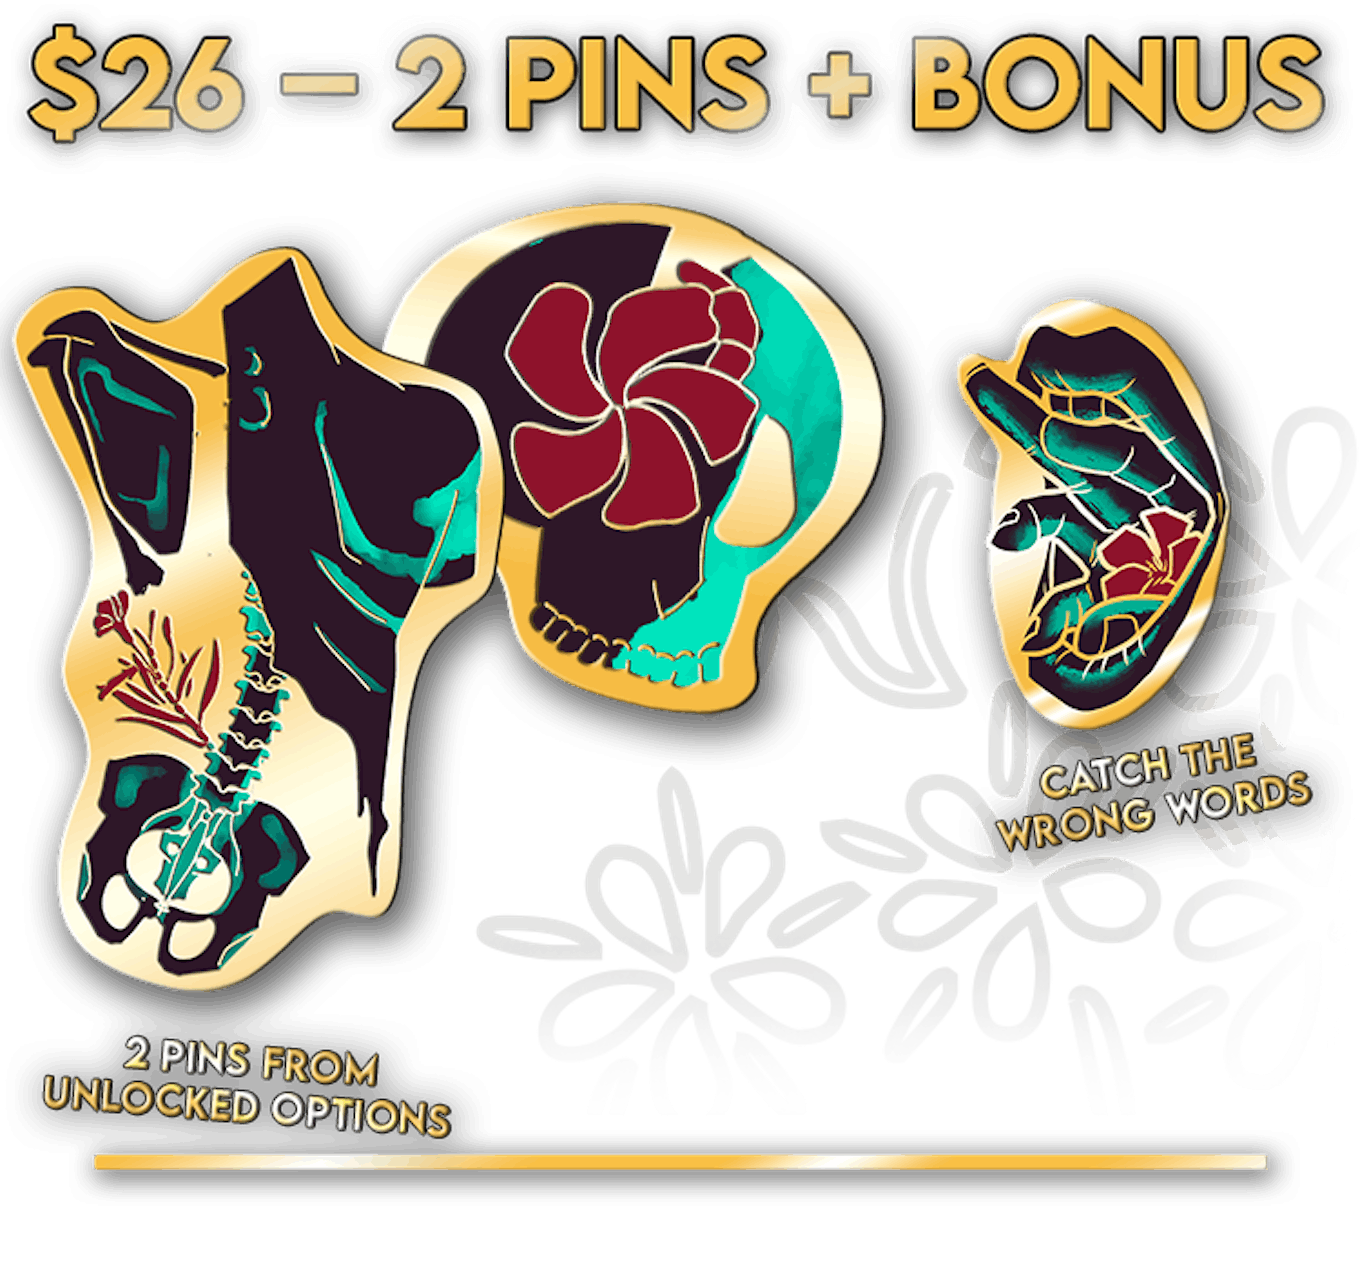 $26 - 2 Pins + Bonus: 2 pins from unlocked options, Catch The Wrong Words